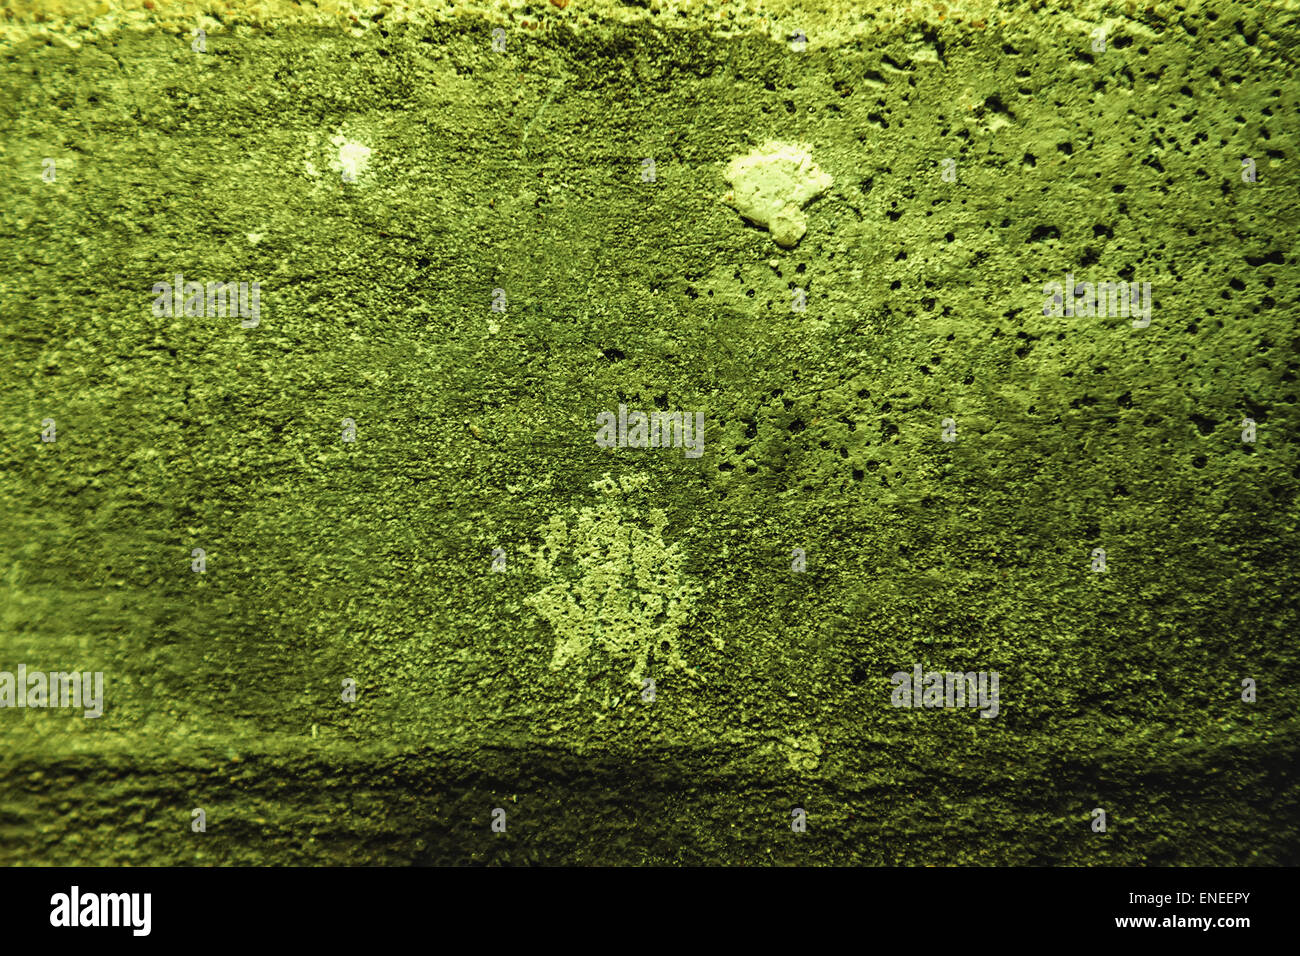 Grunge plaster cement or concrete wall texture green color Stock Photo